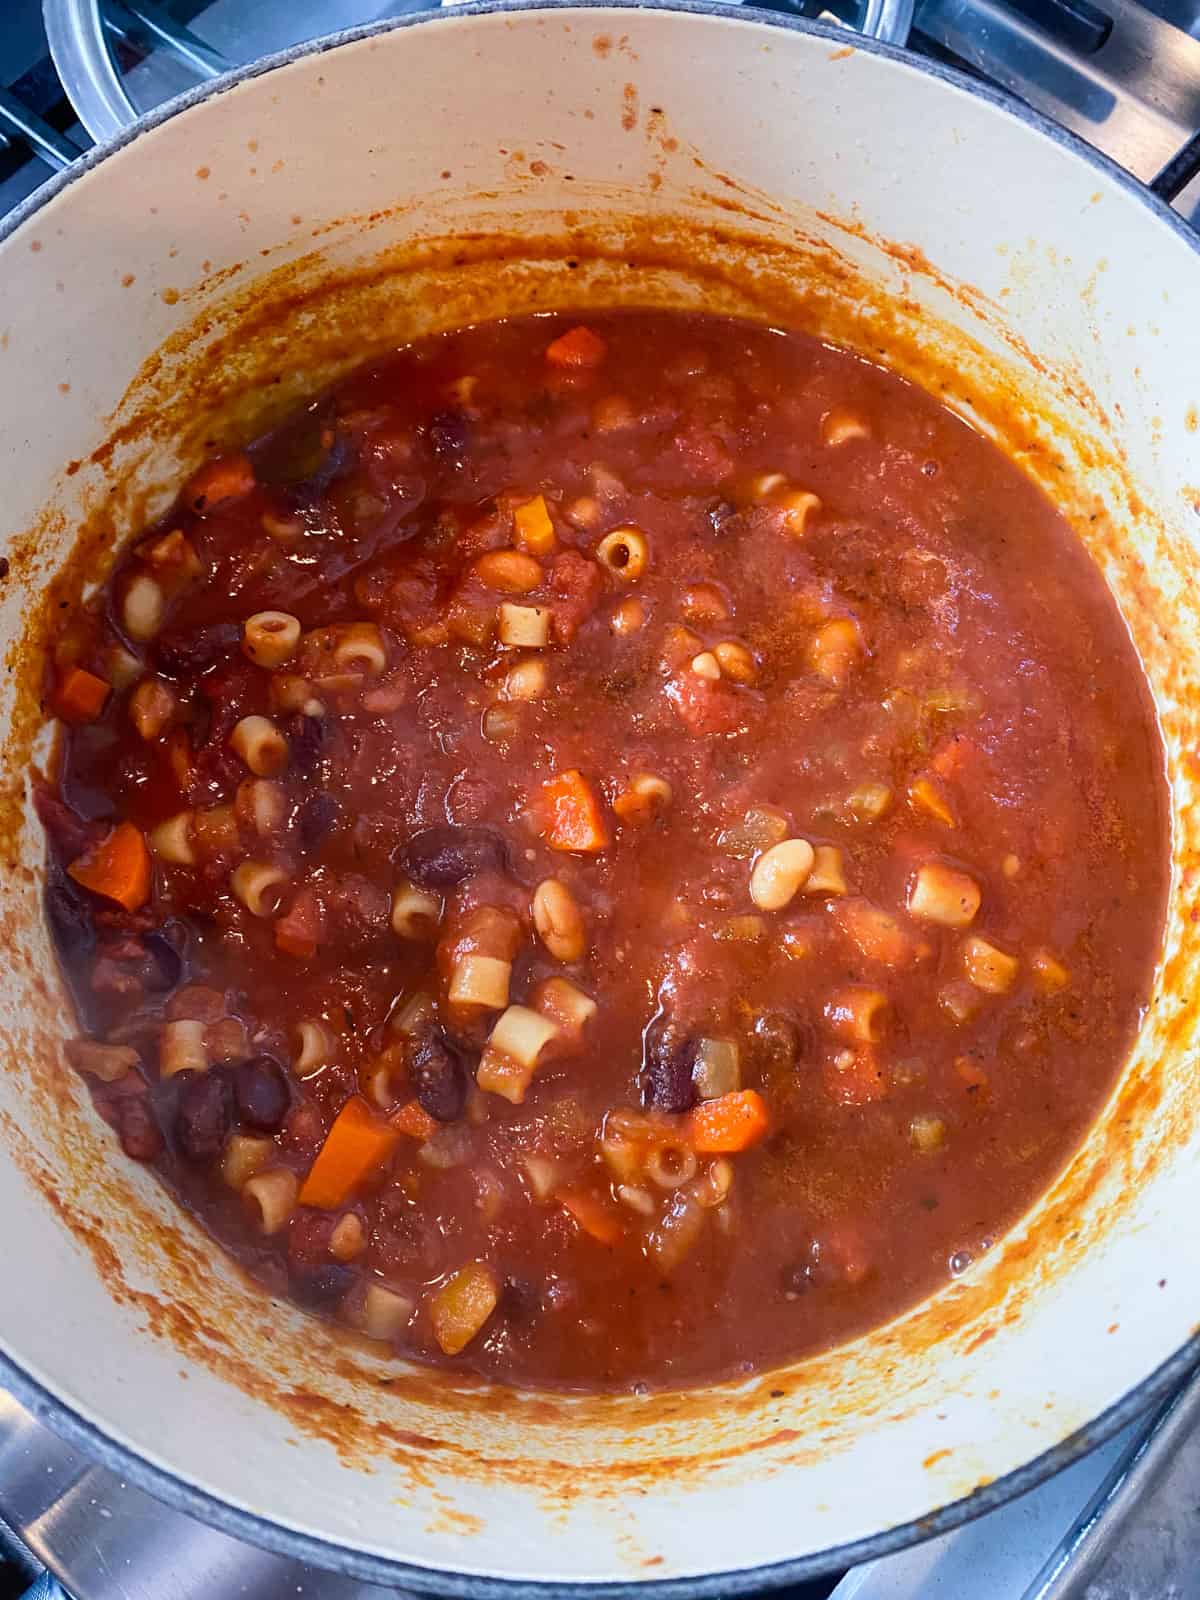 Continue simmering the pasta fagioli until the pasta is cooked through and soup thickens.